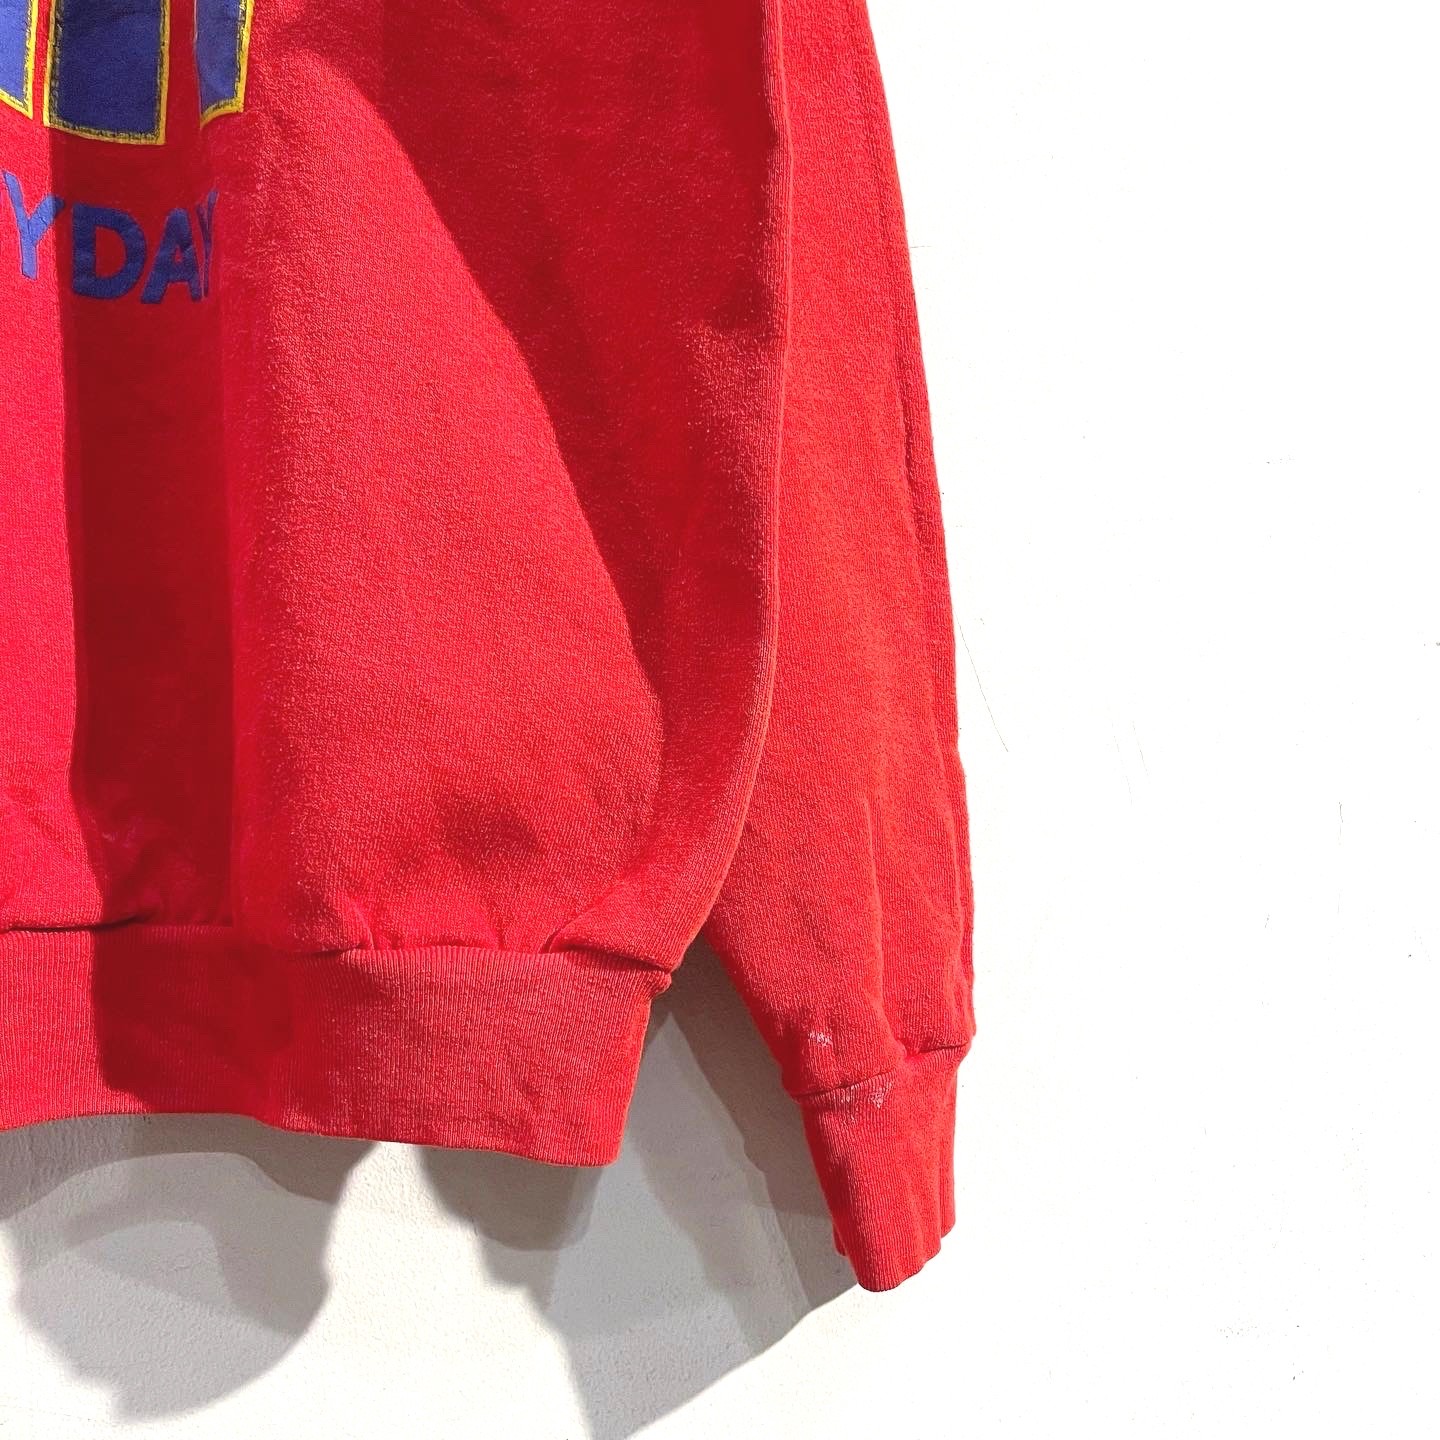 1980's unknown poly×cotton sweat shirt